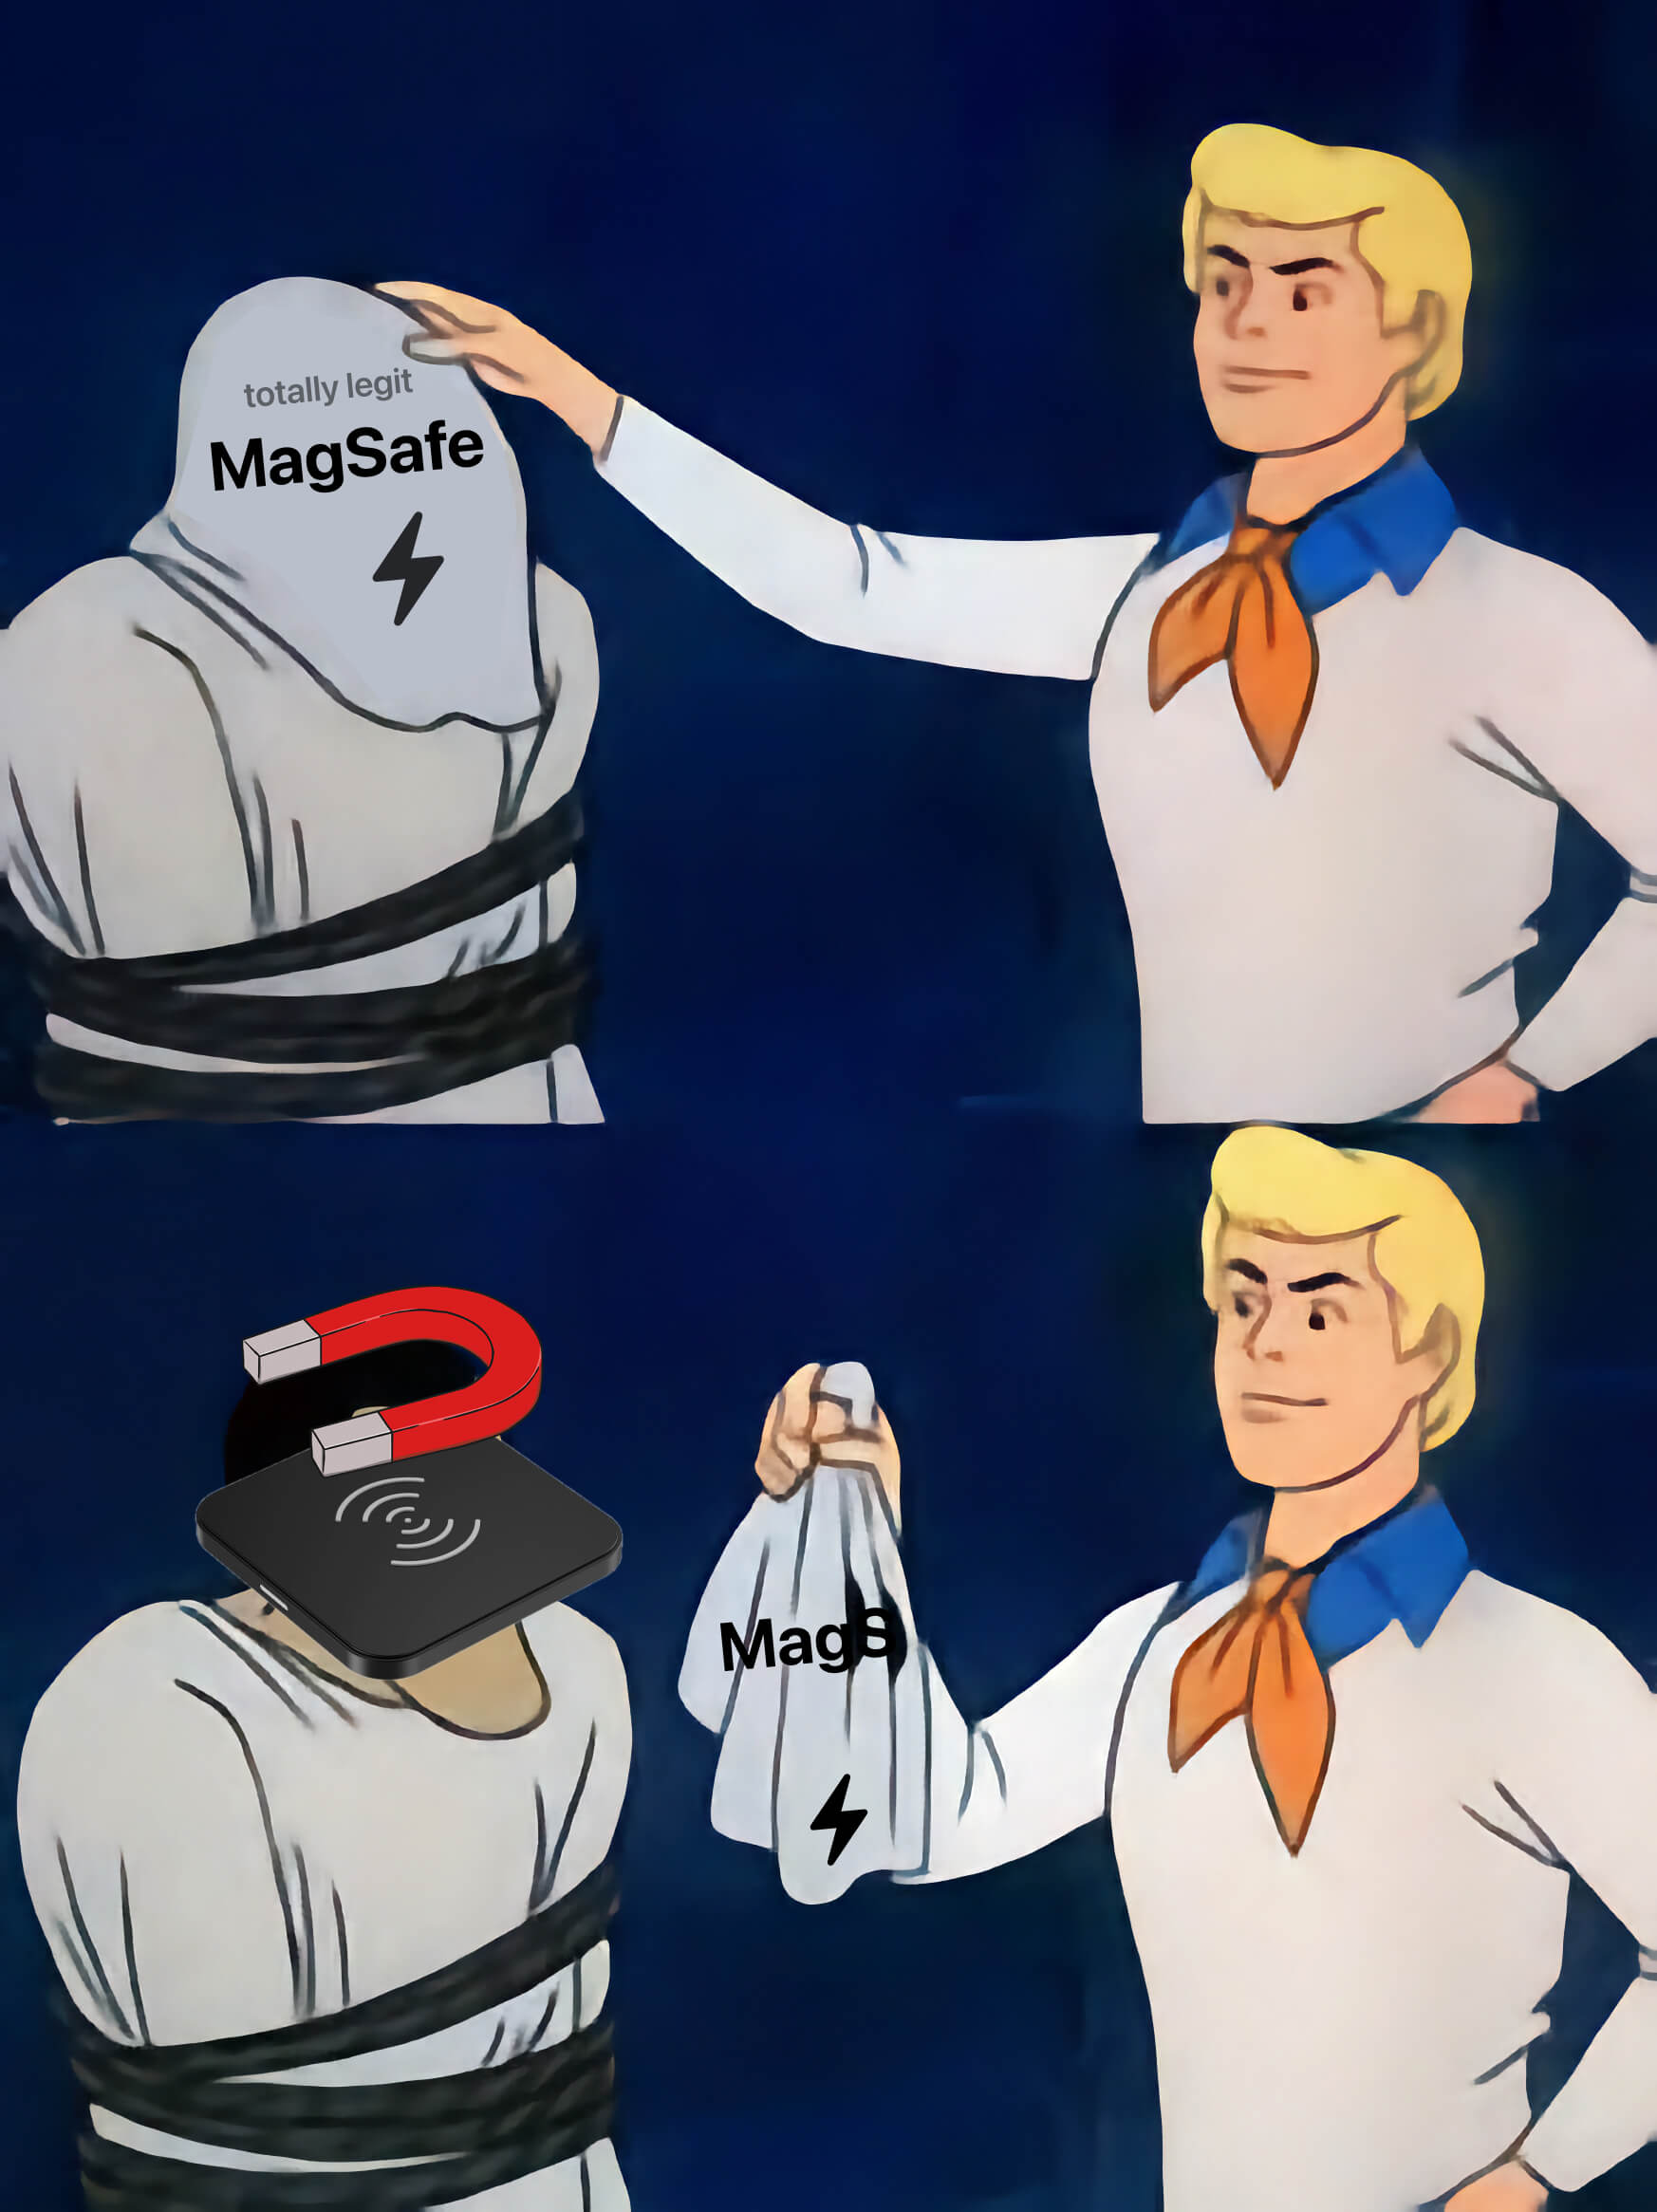 Fred from Scooby Doo unmasking some person who has a disguise on that says 'totally legit MagSafe' and when the disguise is off it's revealed it's just Qi1 with a magnet